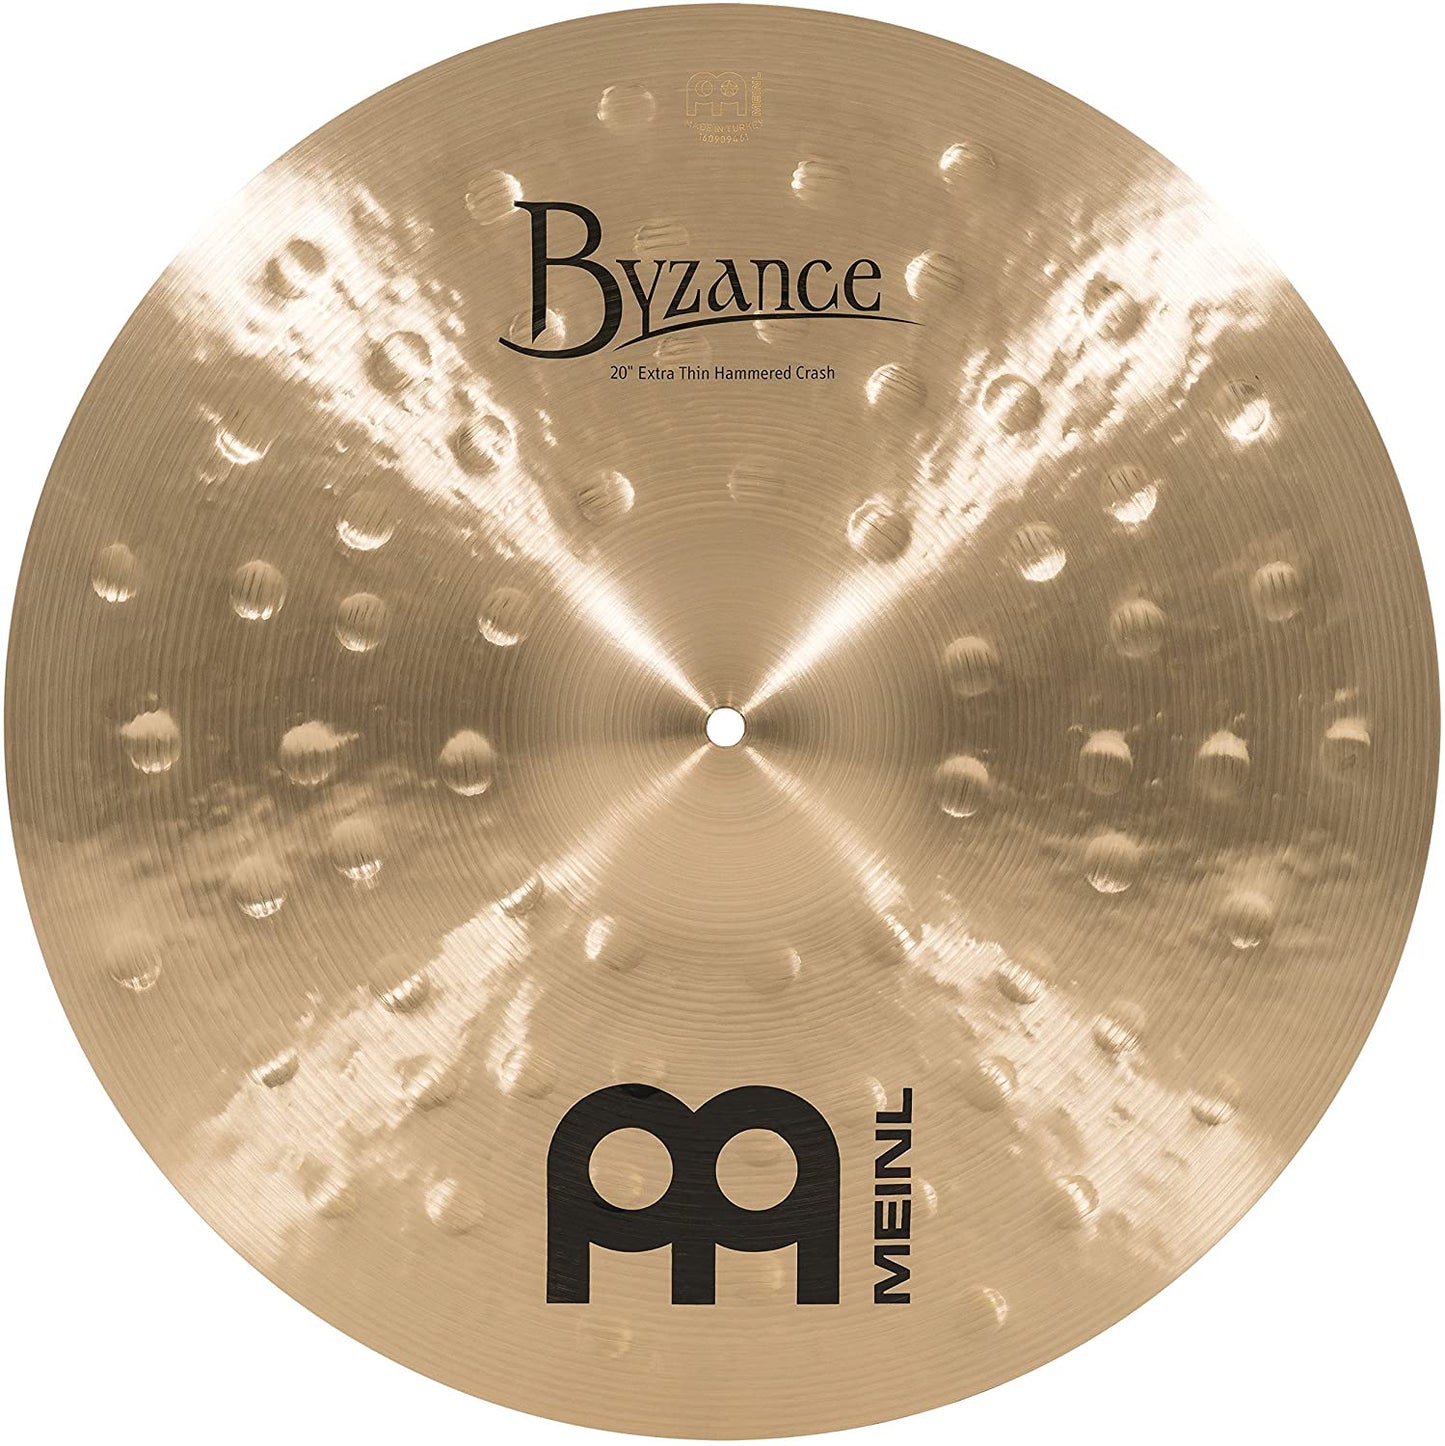 Meinl 20" Extra Thin Hammered Crash Cymbal